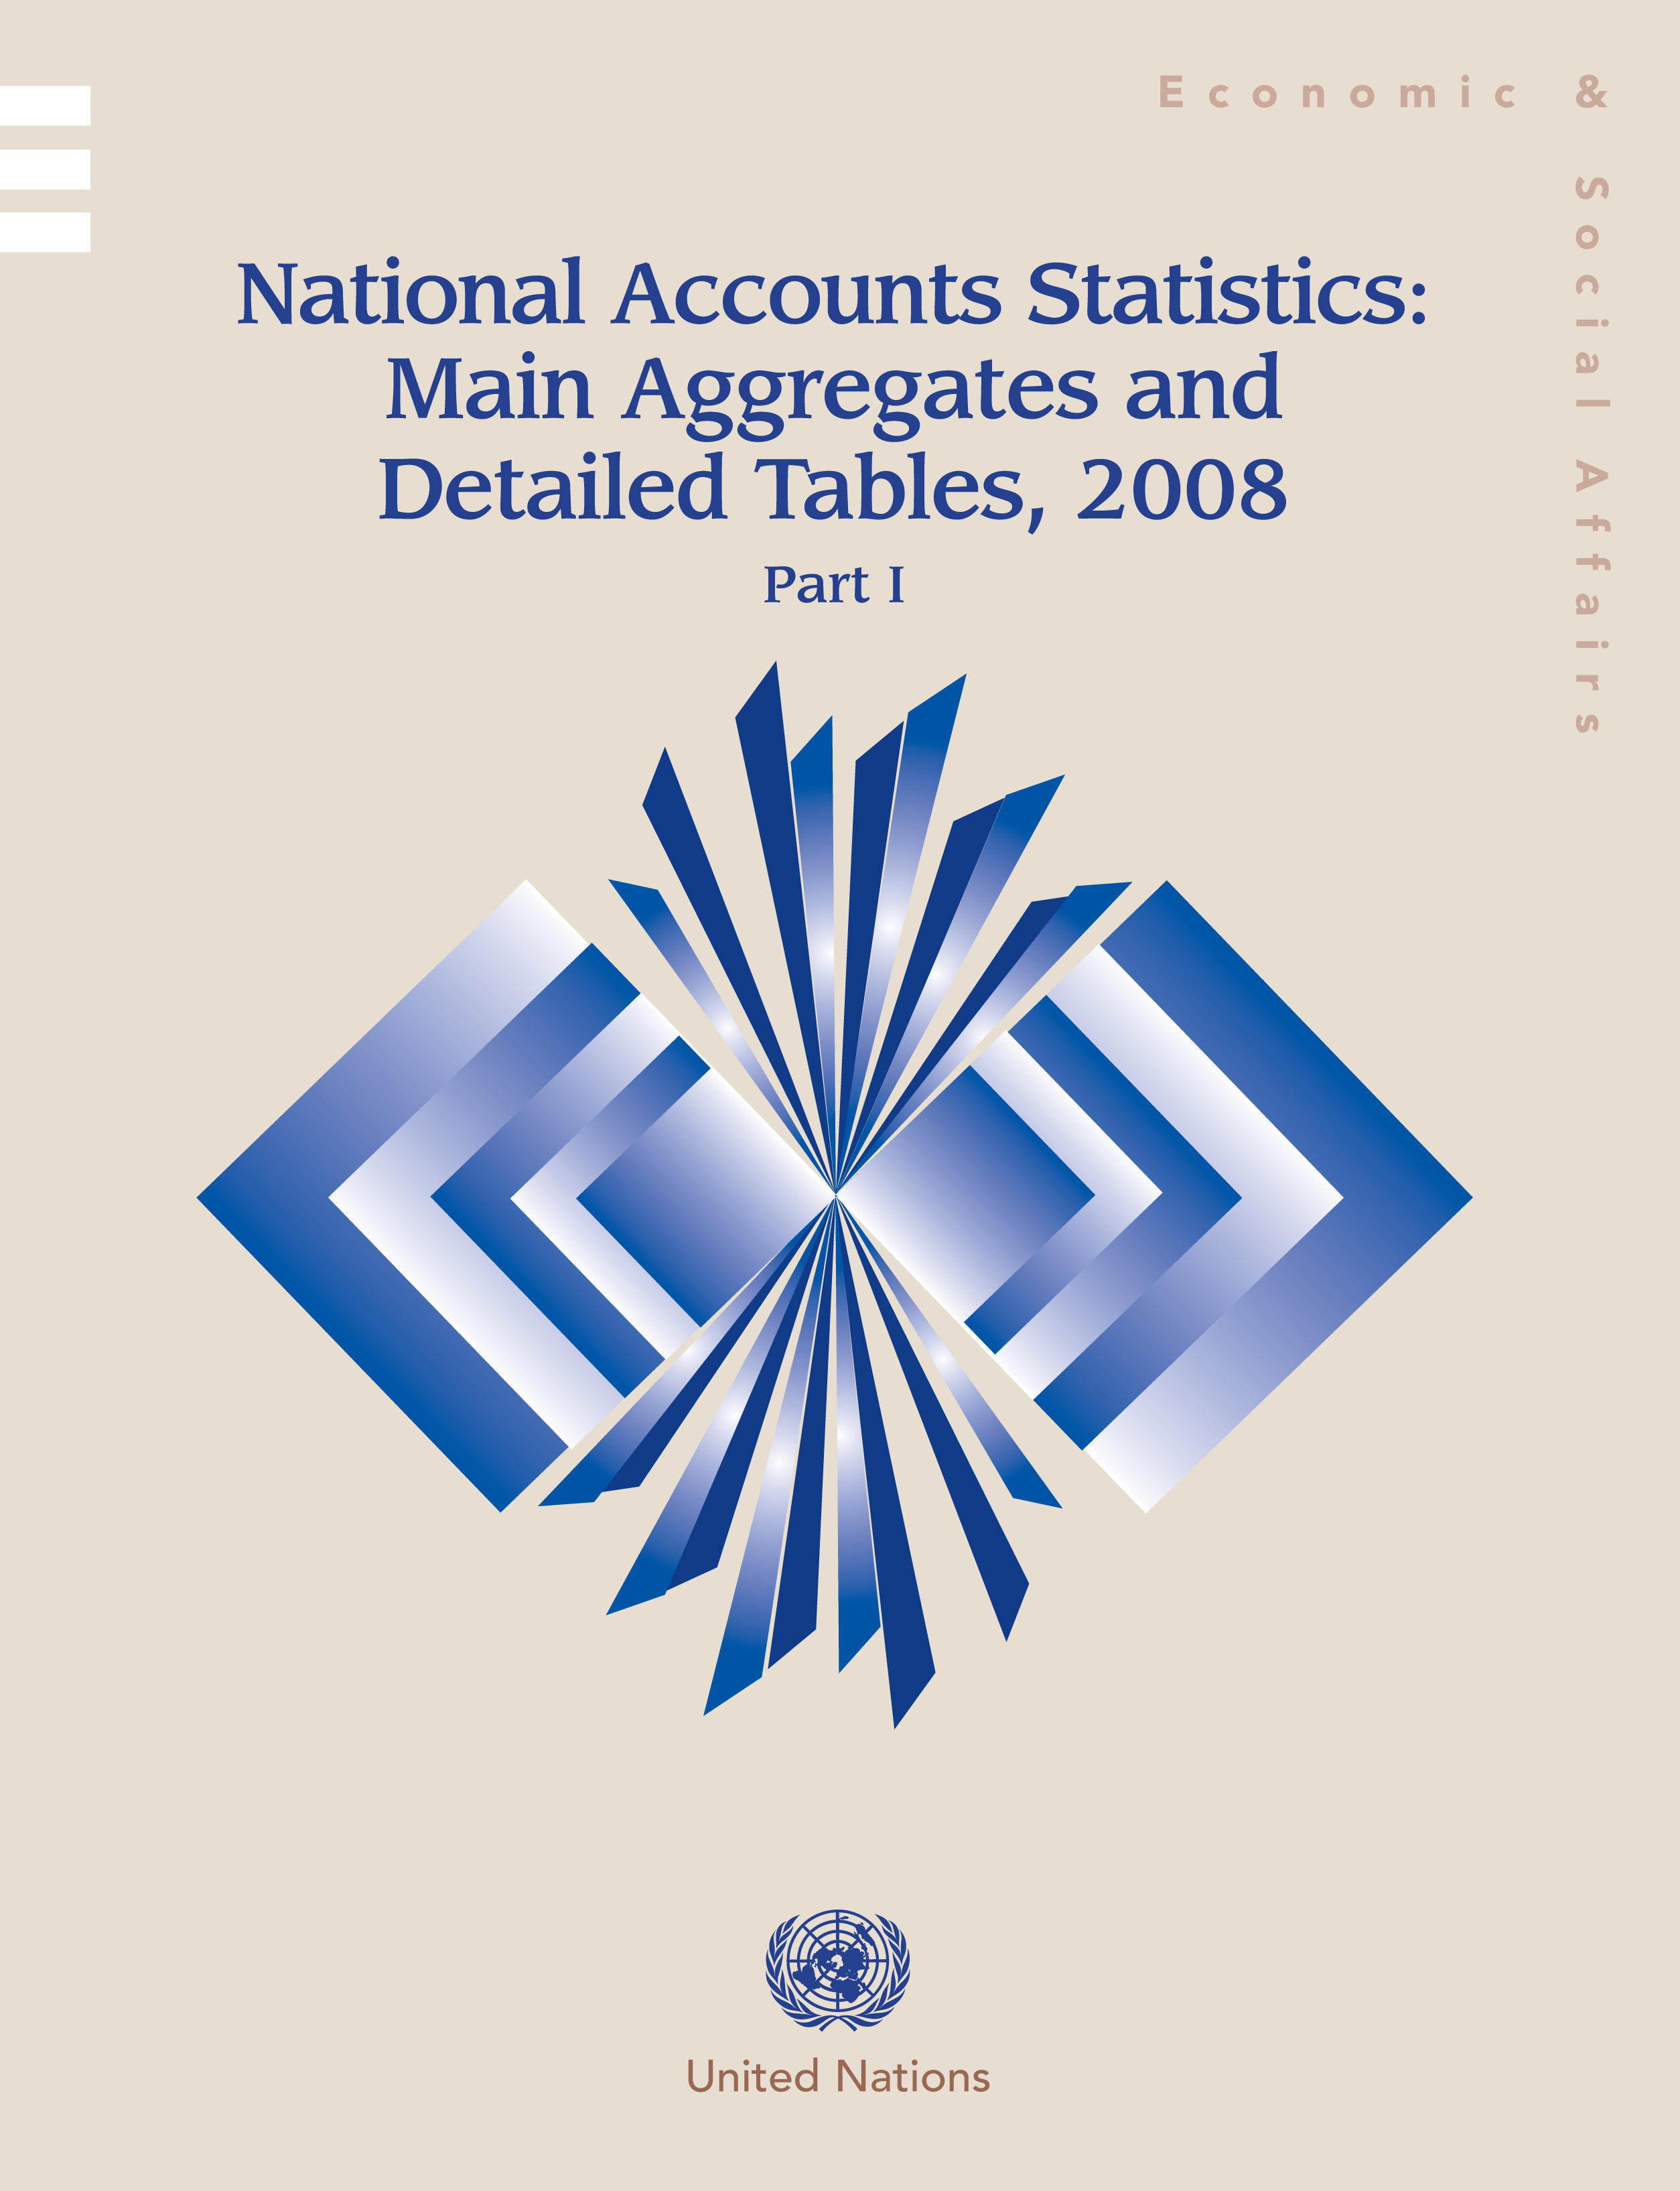 image of National Accounts Statistics: Main Aggregates and Detailed Tables 2008